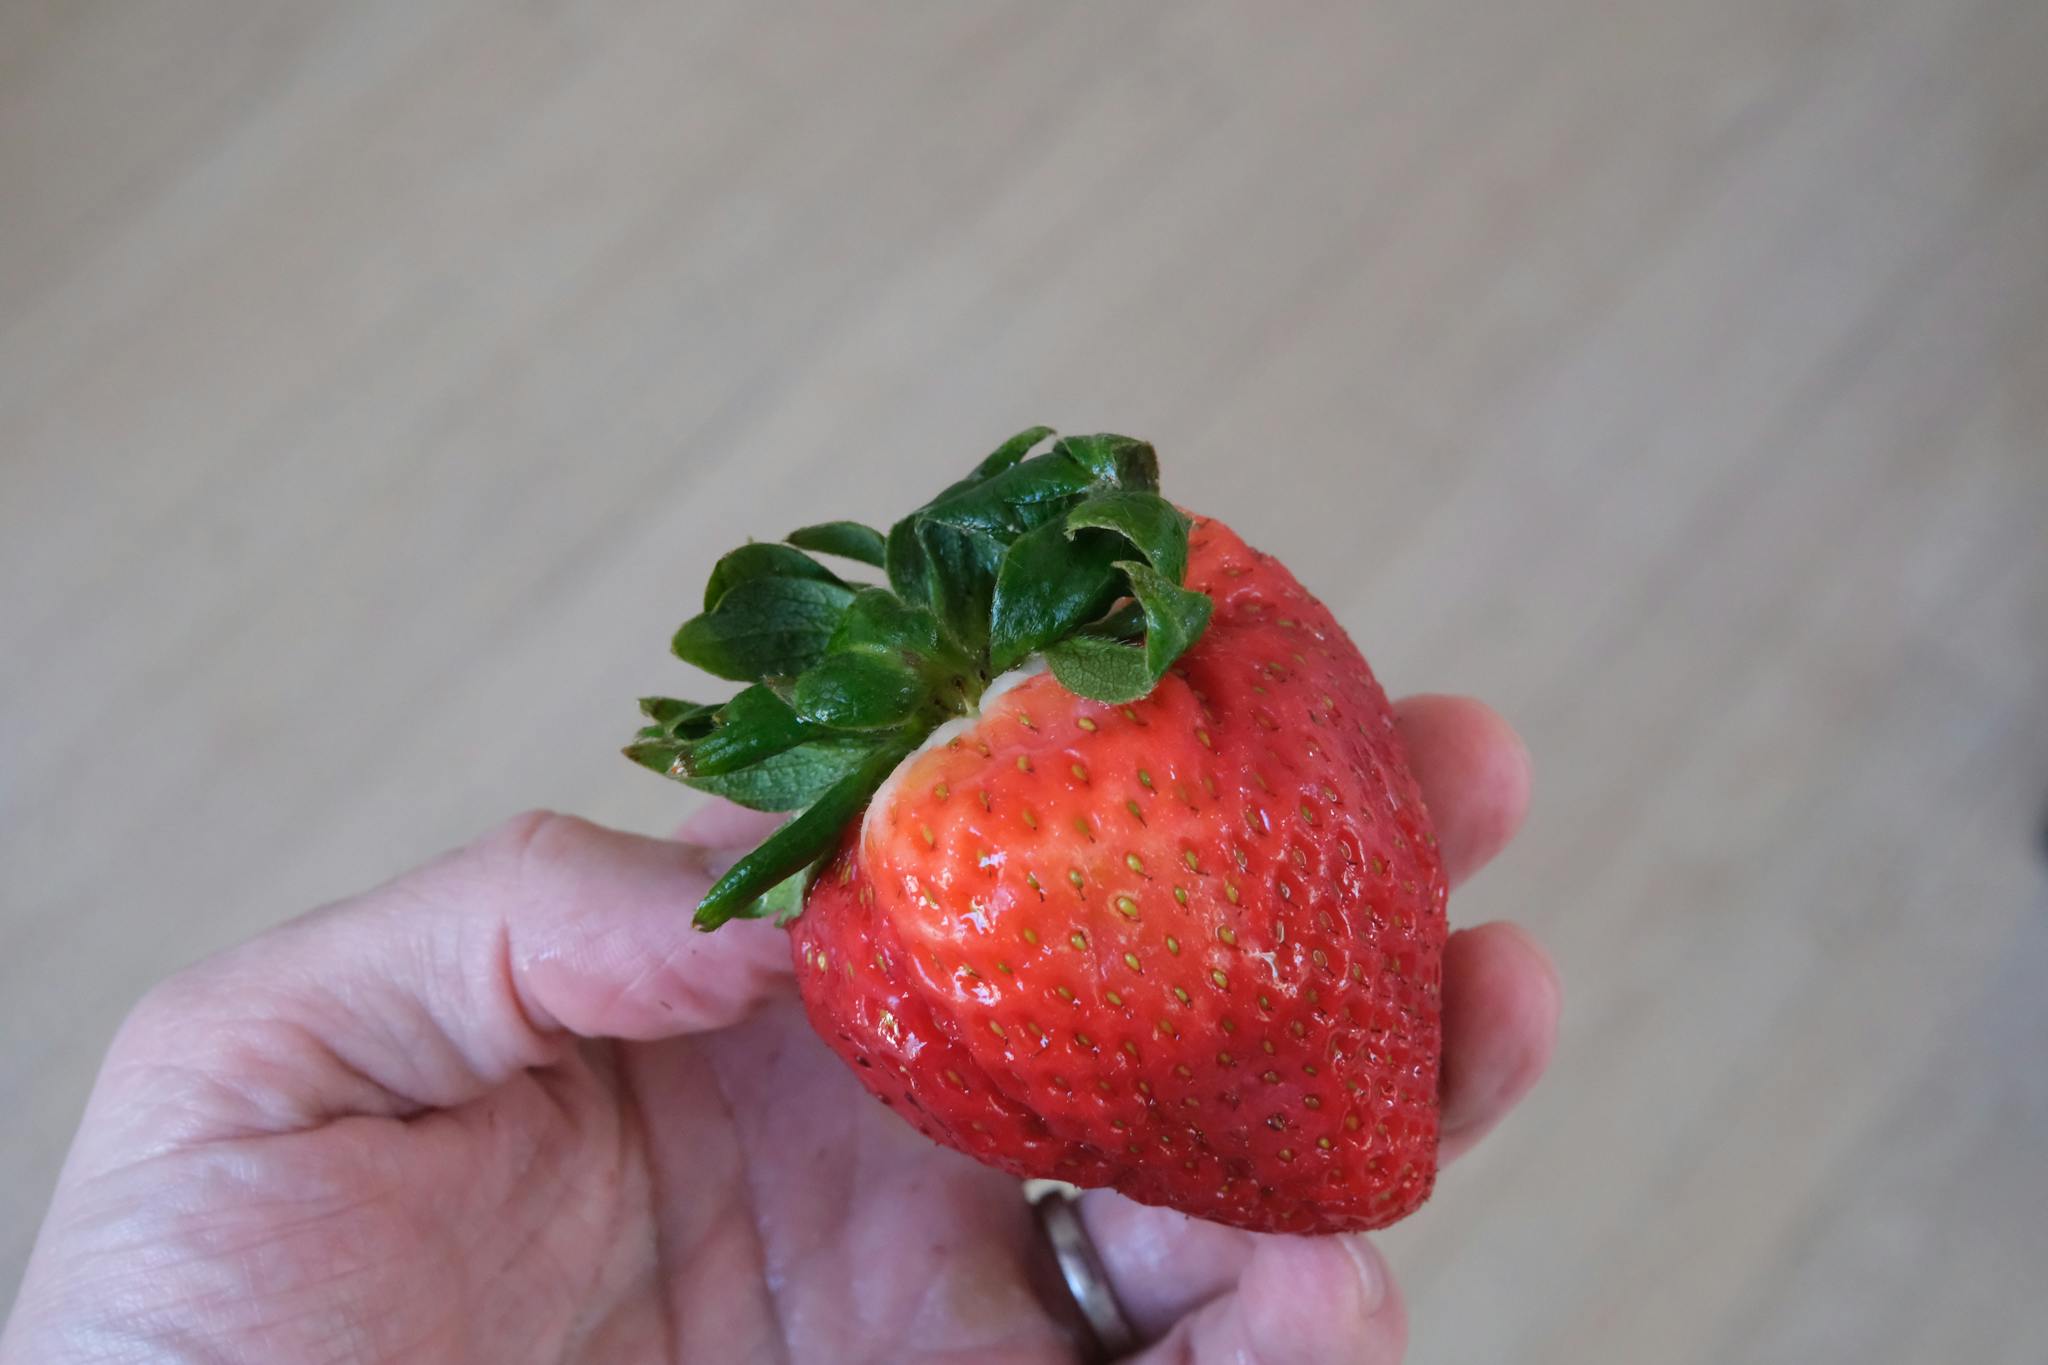 A hand holding a large strawberry against a blurry background